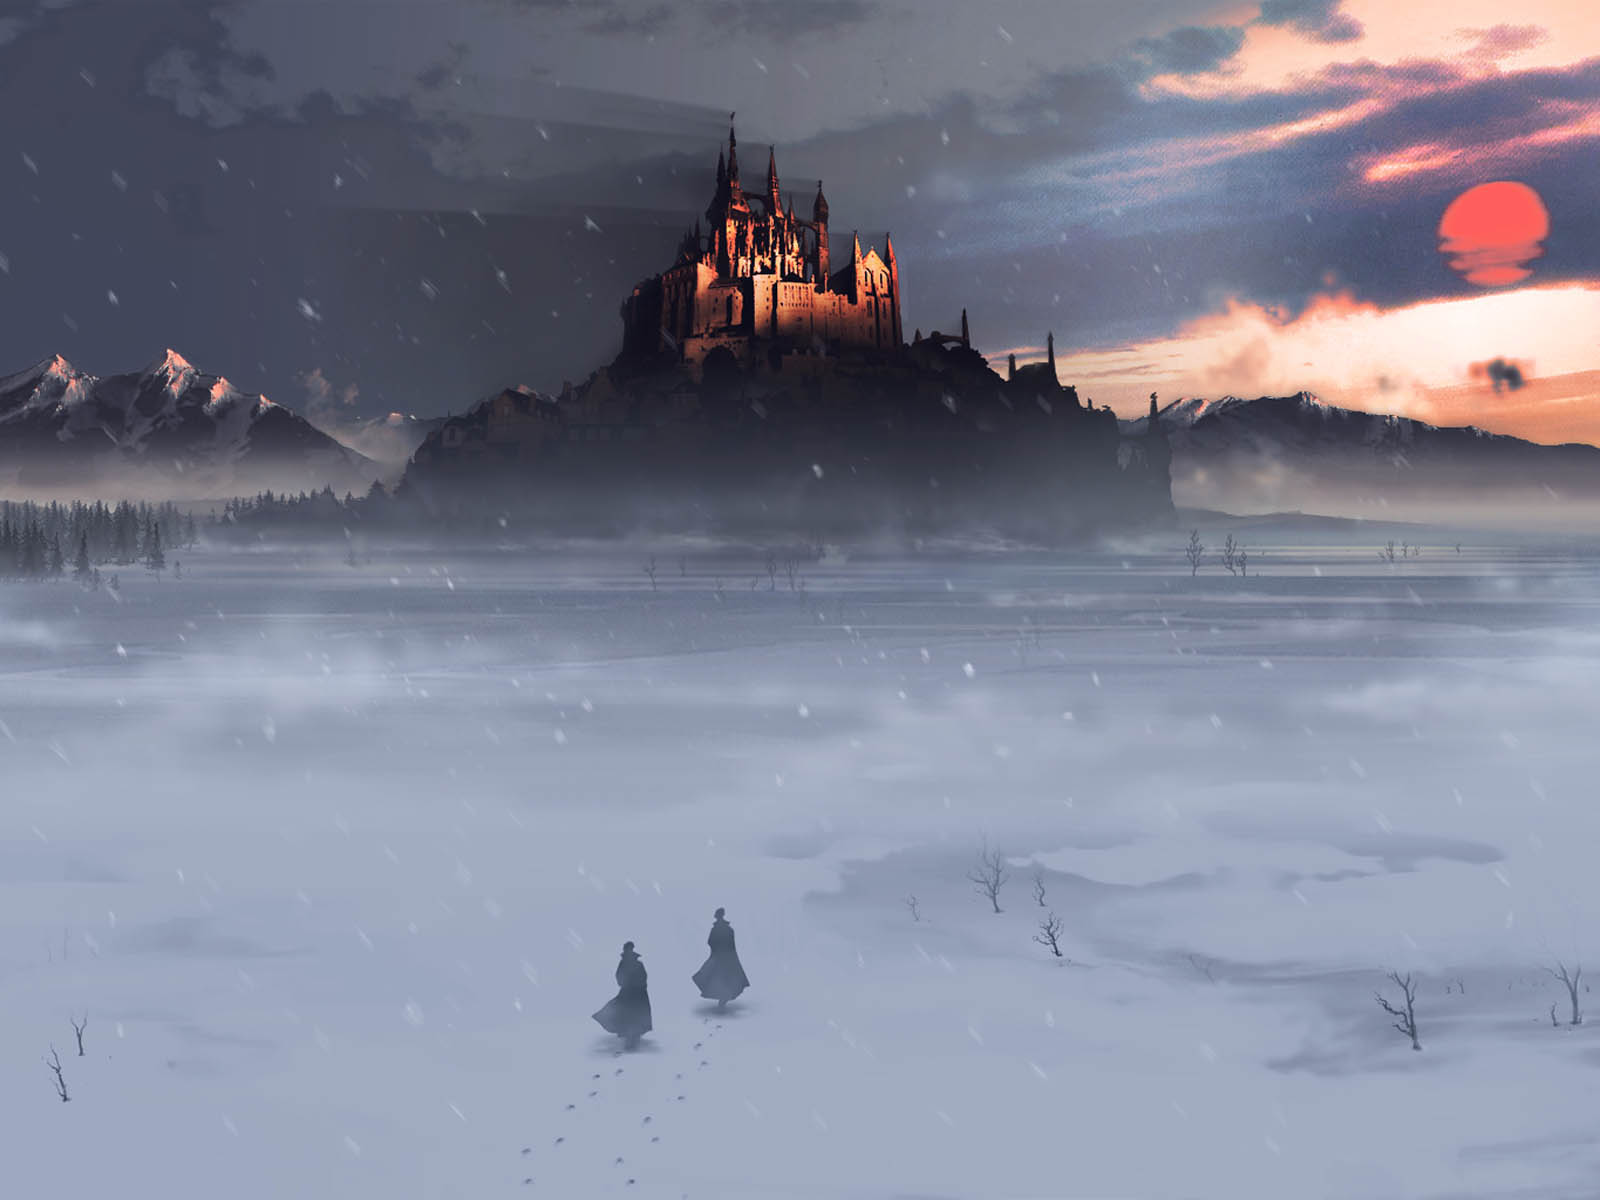 Enchanted Castle at sunset, covered in snow, with a winter vibe.